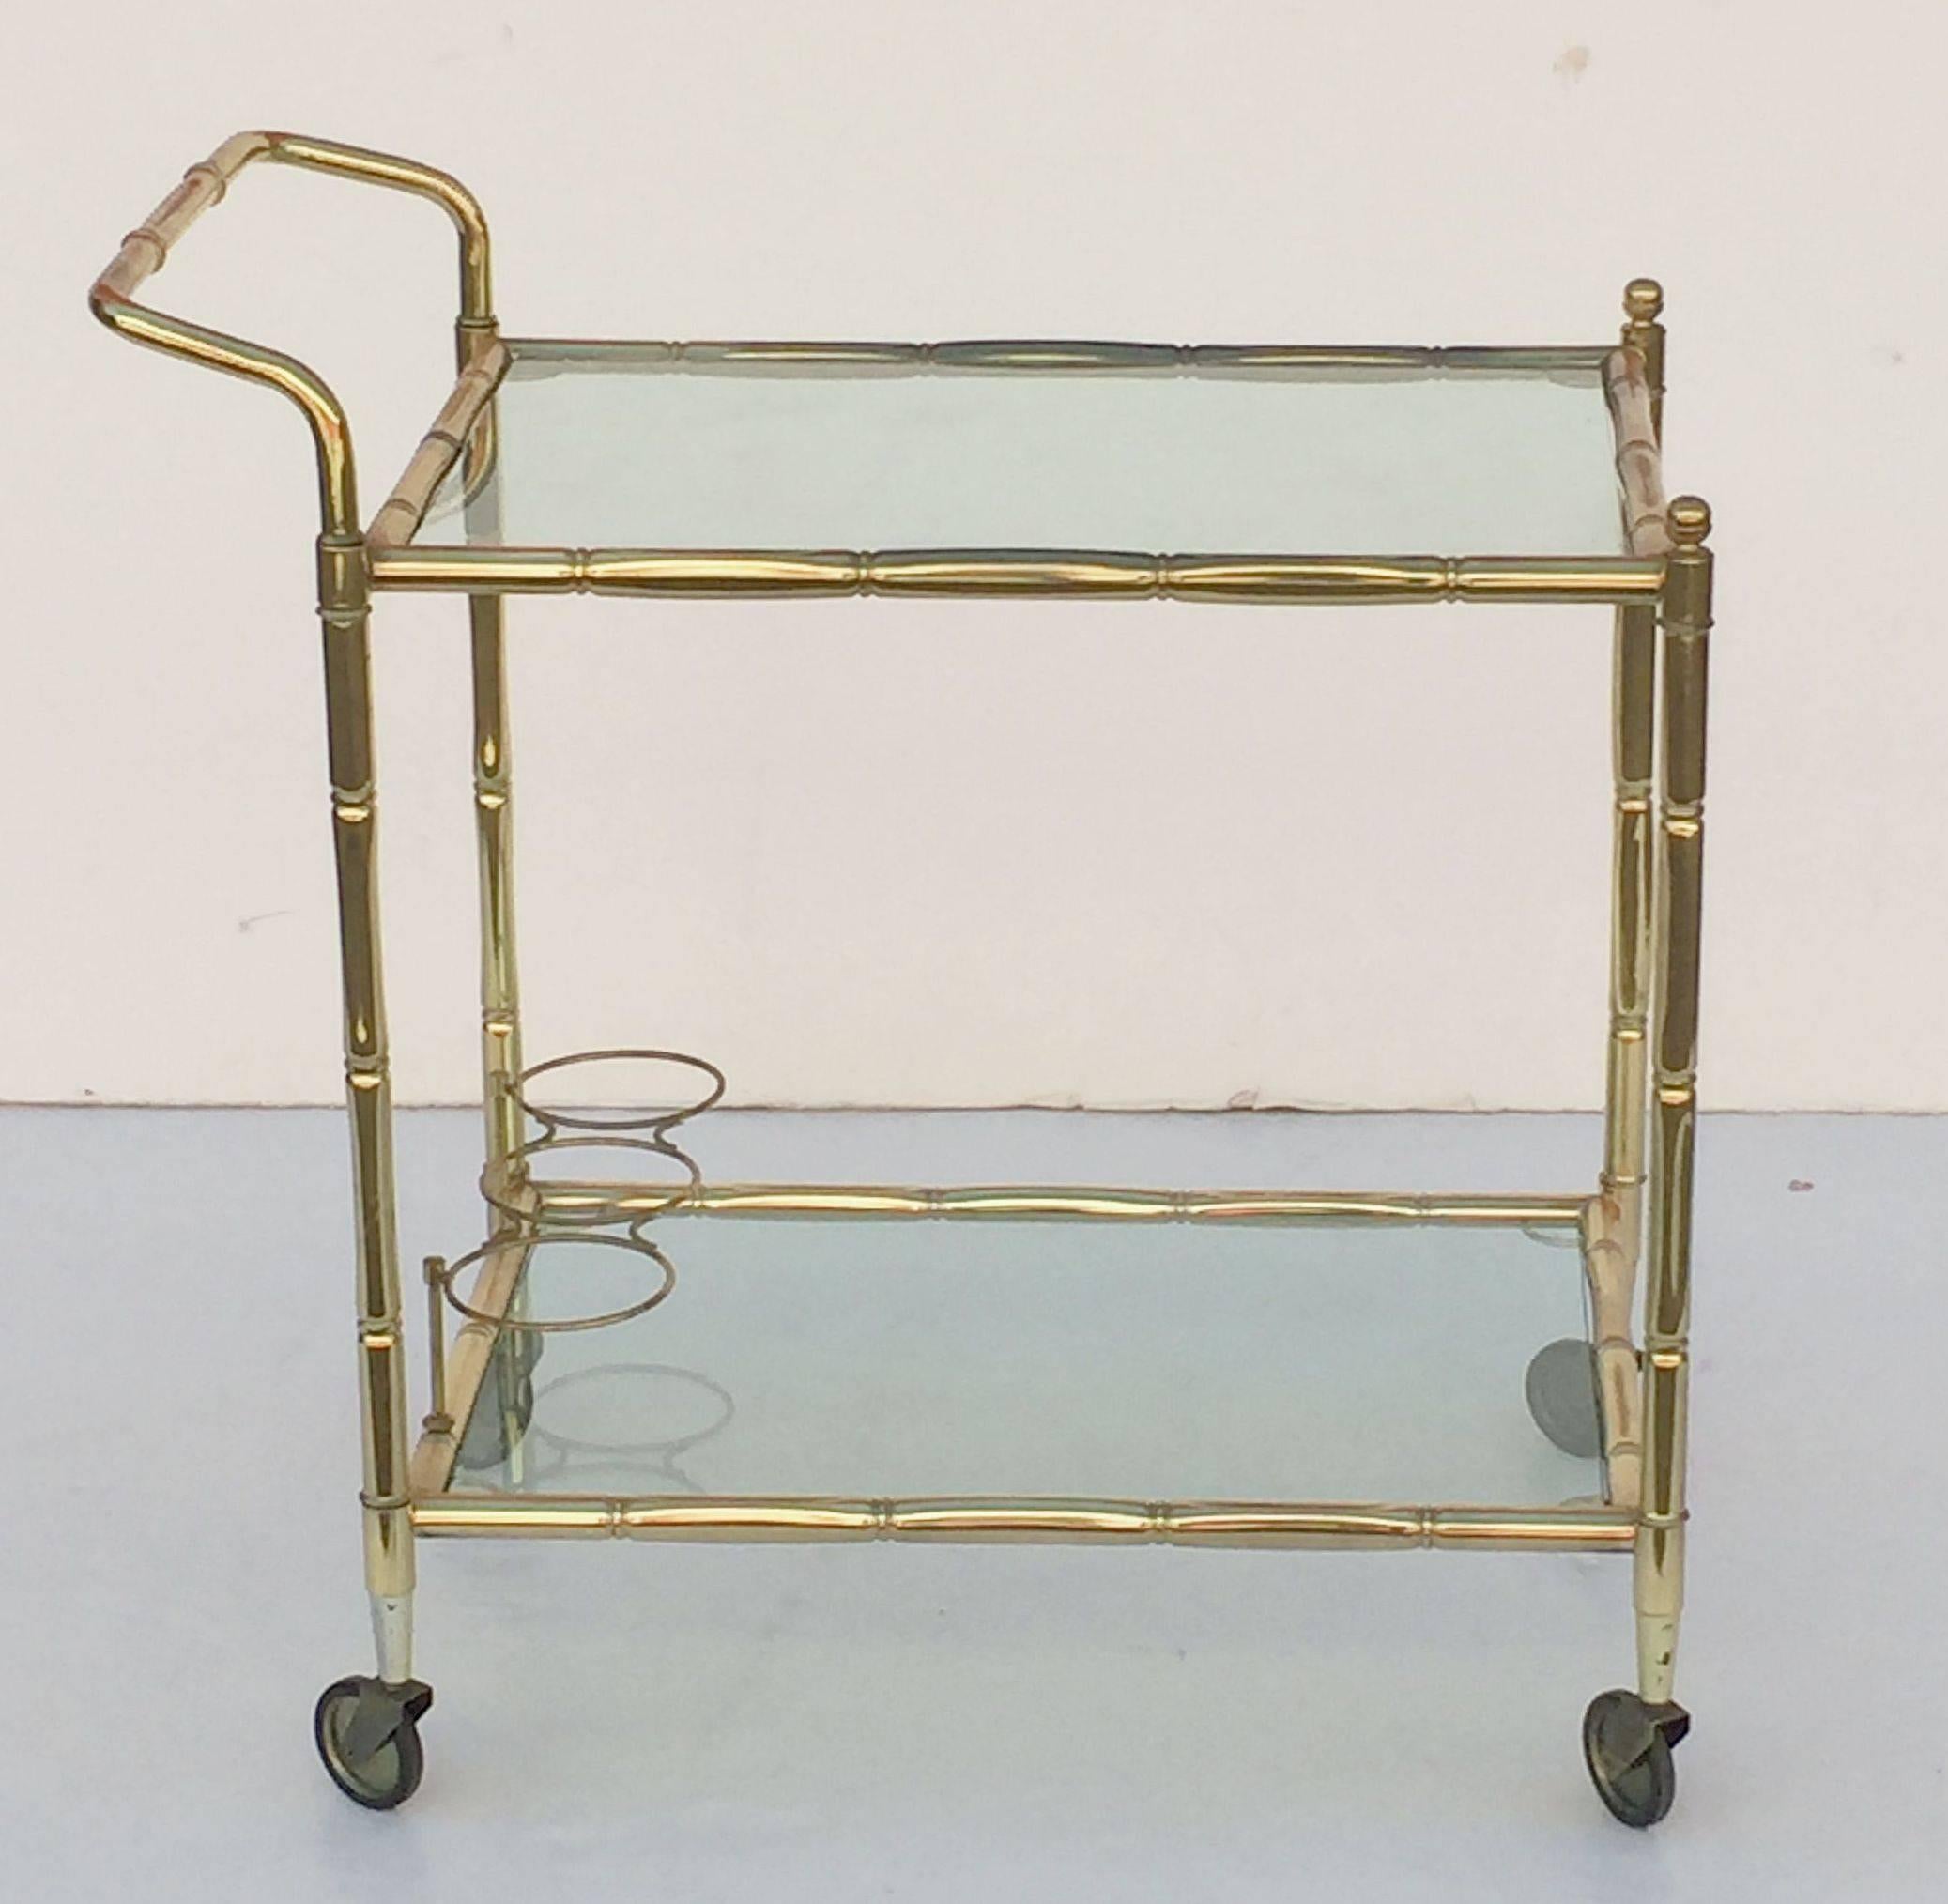 A handsome vintage French rectangular bar cart table or serving trolley in brass with a bamboo design, and featuring two tinted glass tiers, with bottle rack on second tier, on rolling caster wheels. 

Perfect for use as a side or end table.